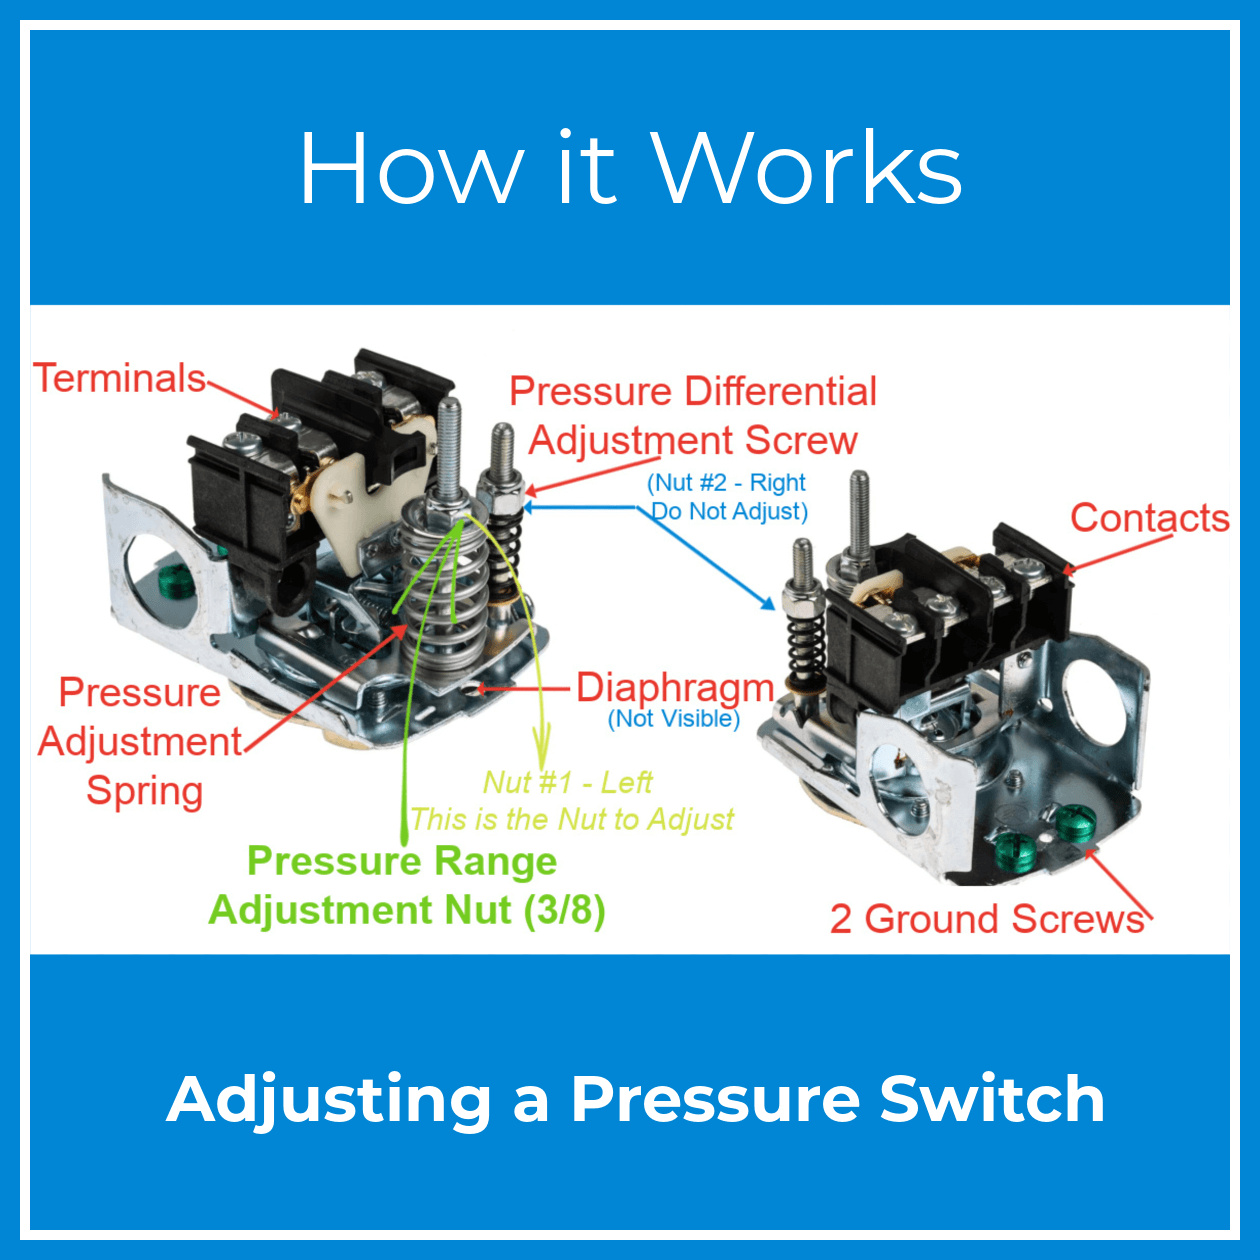 How to Adjust a Pressure Switch